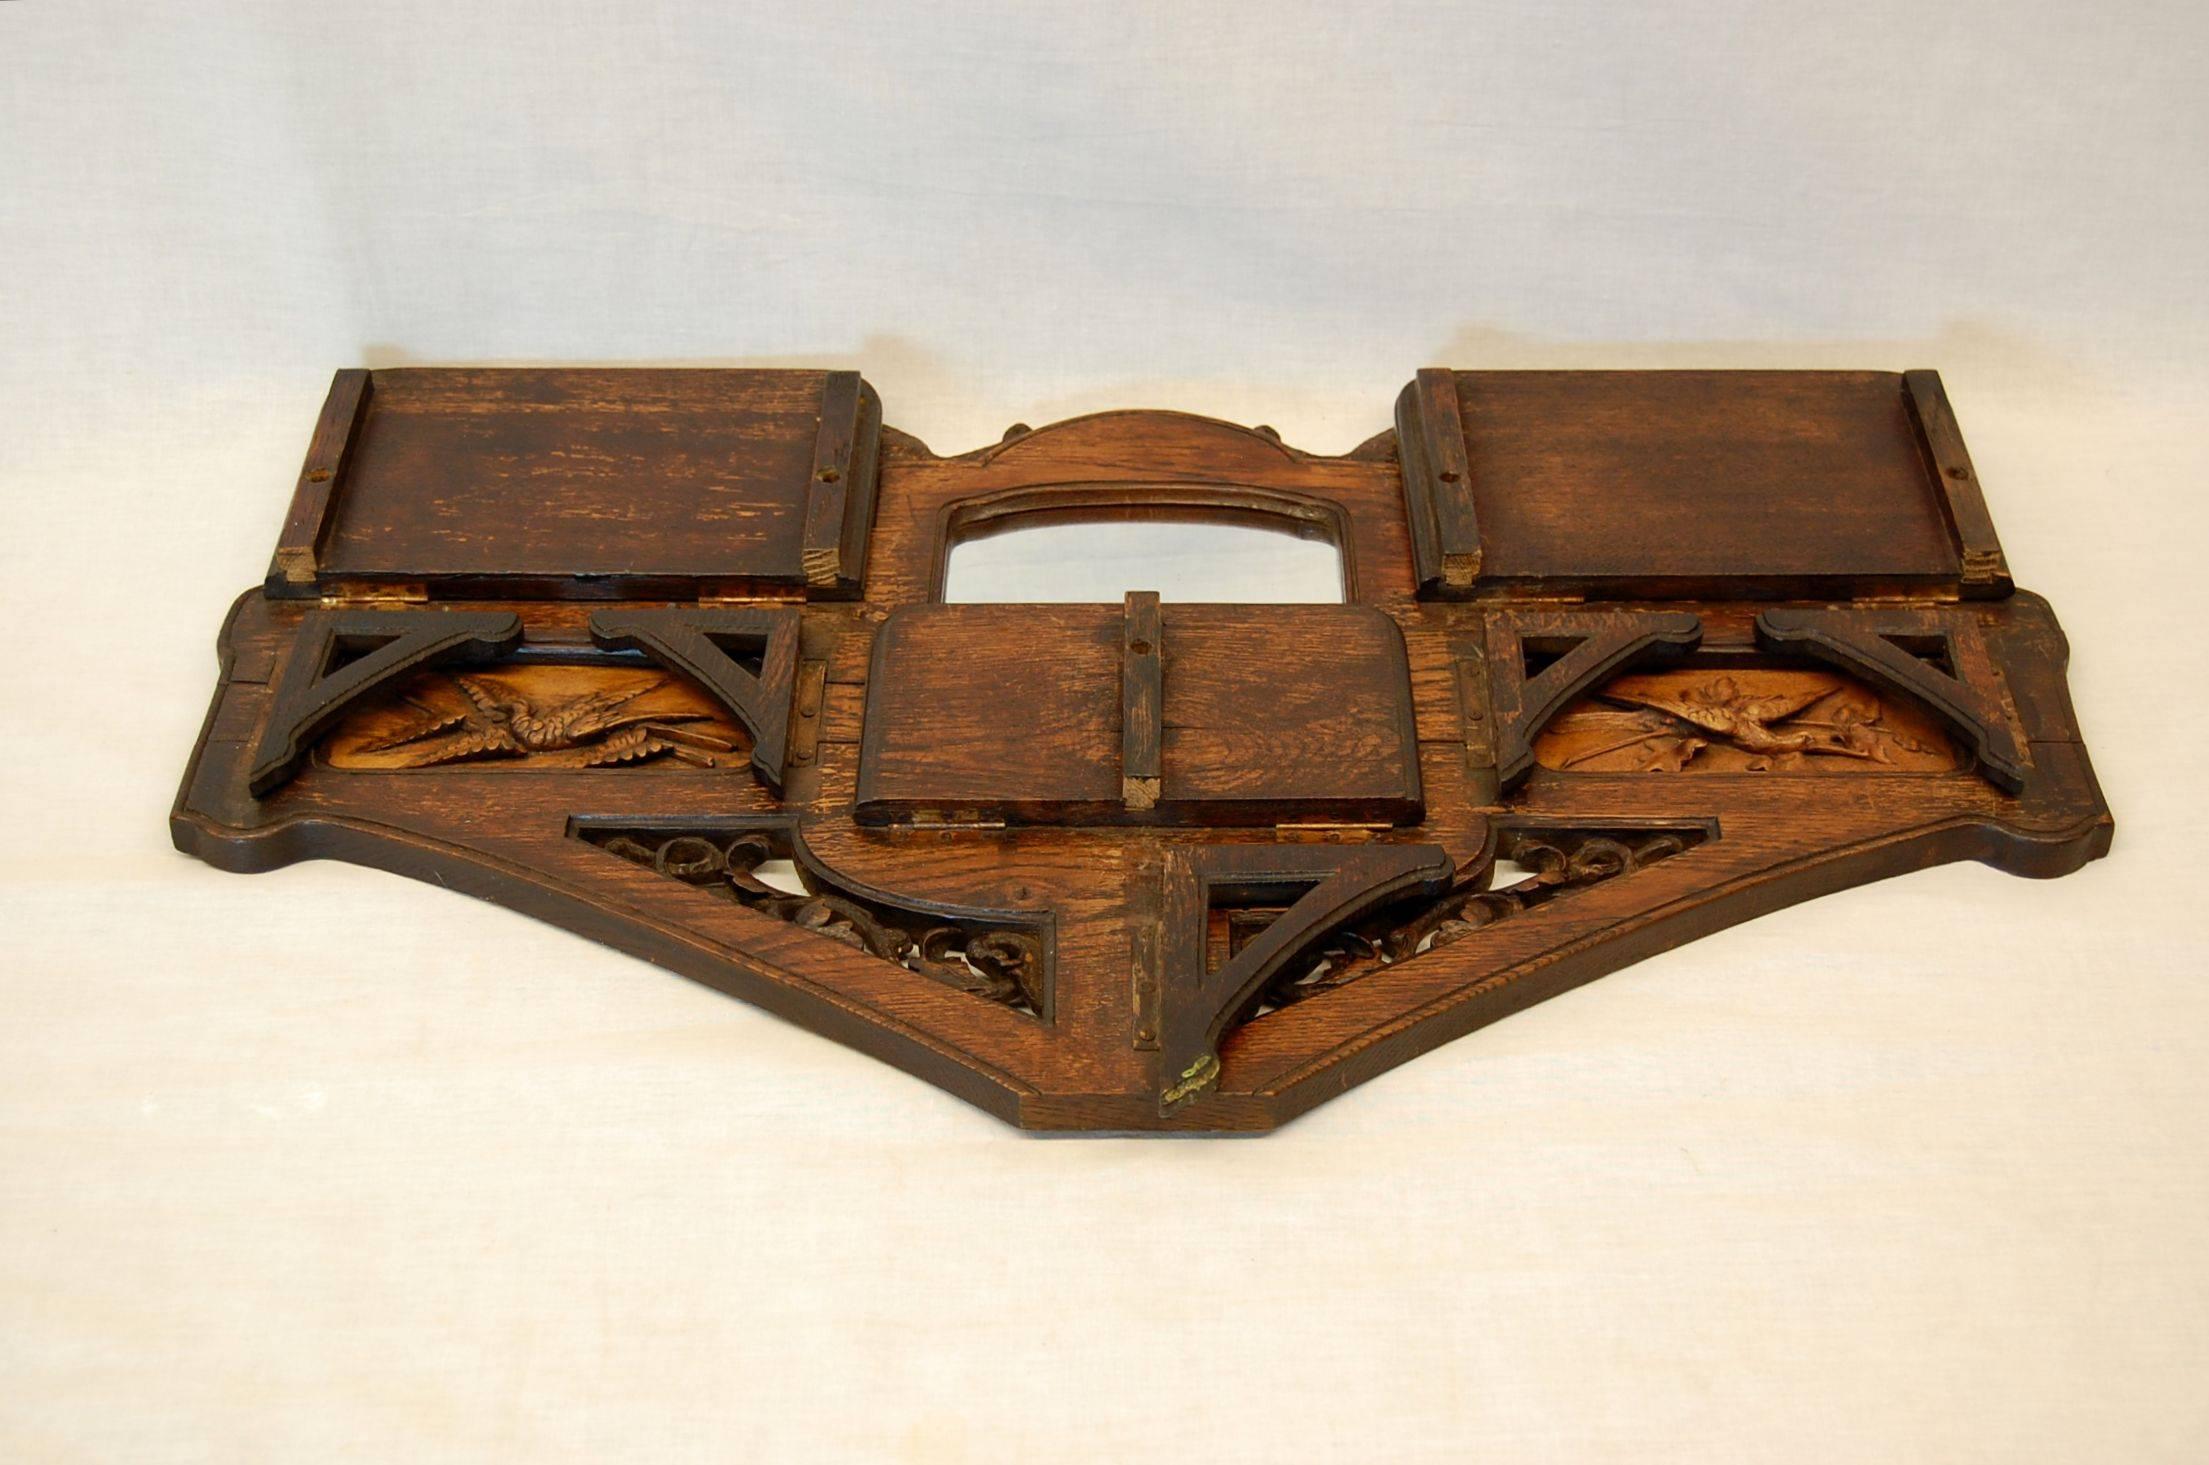 Exceptional carved wood wall shelf with mirror for shaving. Two wonderful monkeys and a pair of cranes in flight adorn this piece. The cranes are carved from a wood that is lighter in color and stands out from the oak. Very solid piece, shelves and